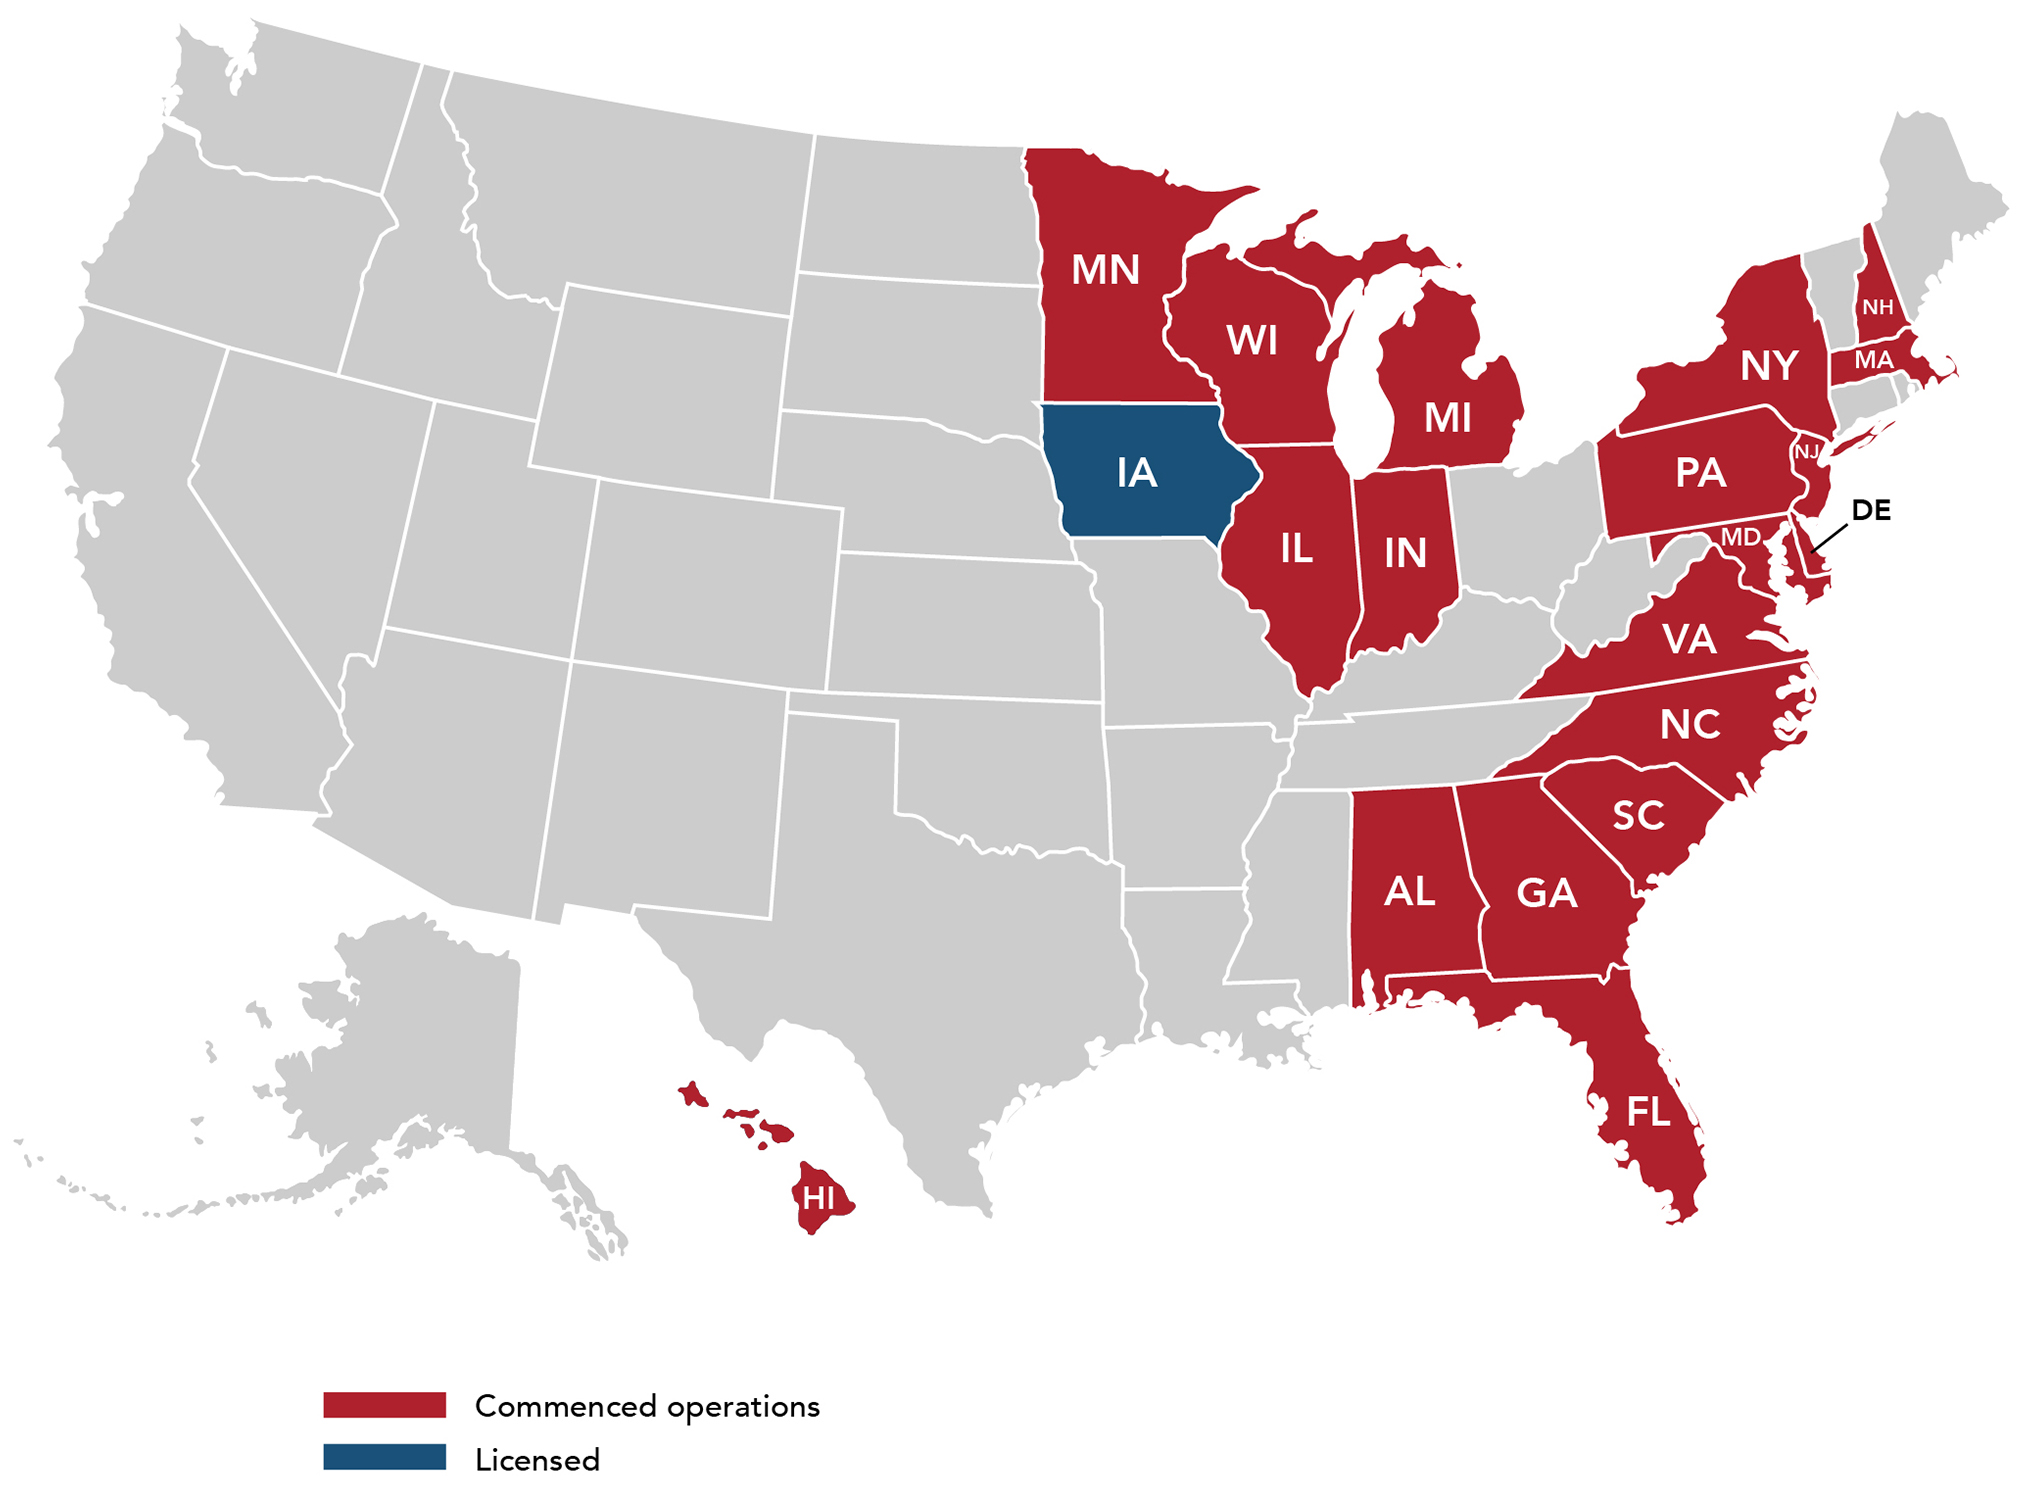 A map showing which states we can write insurance and have license